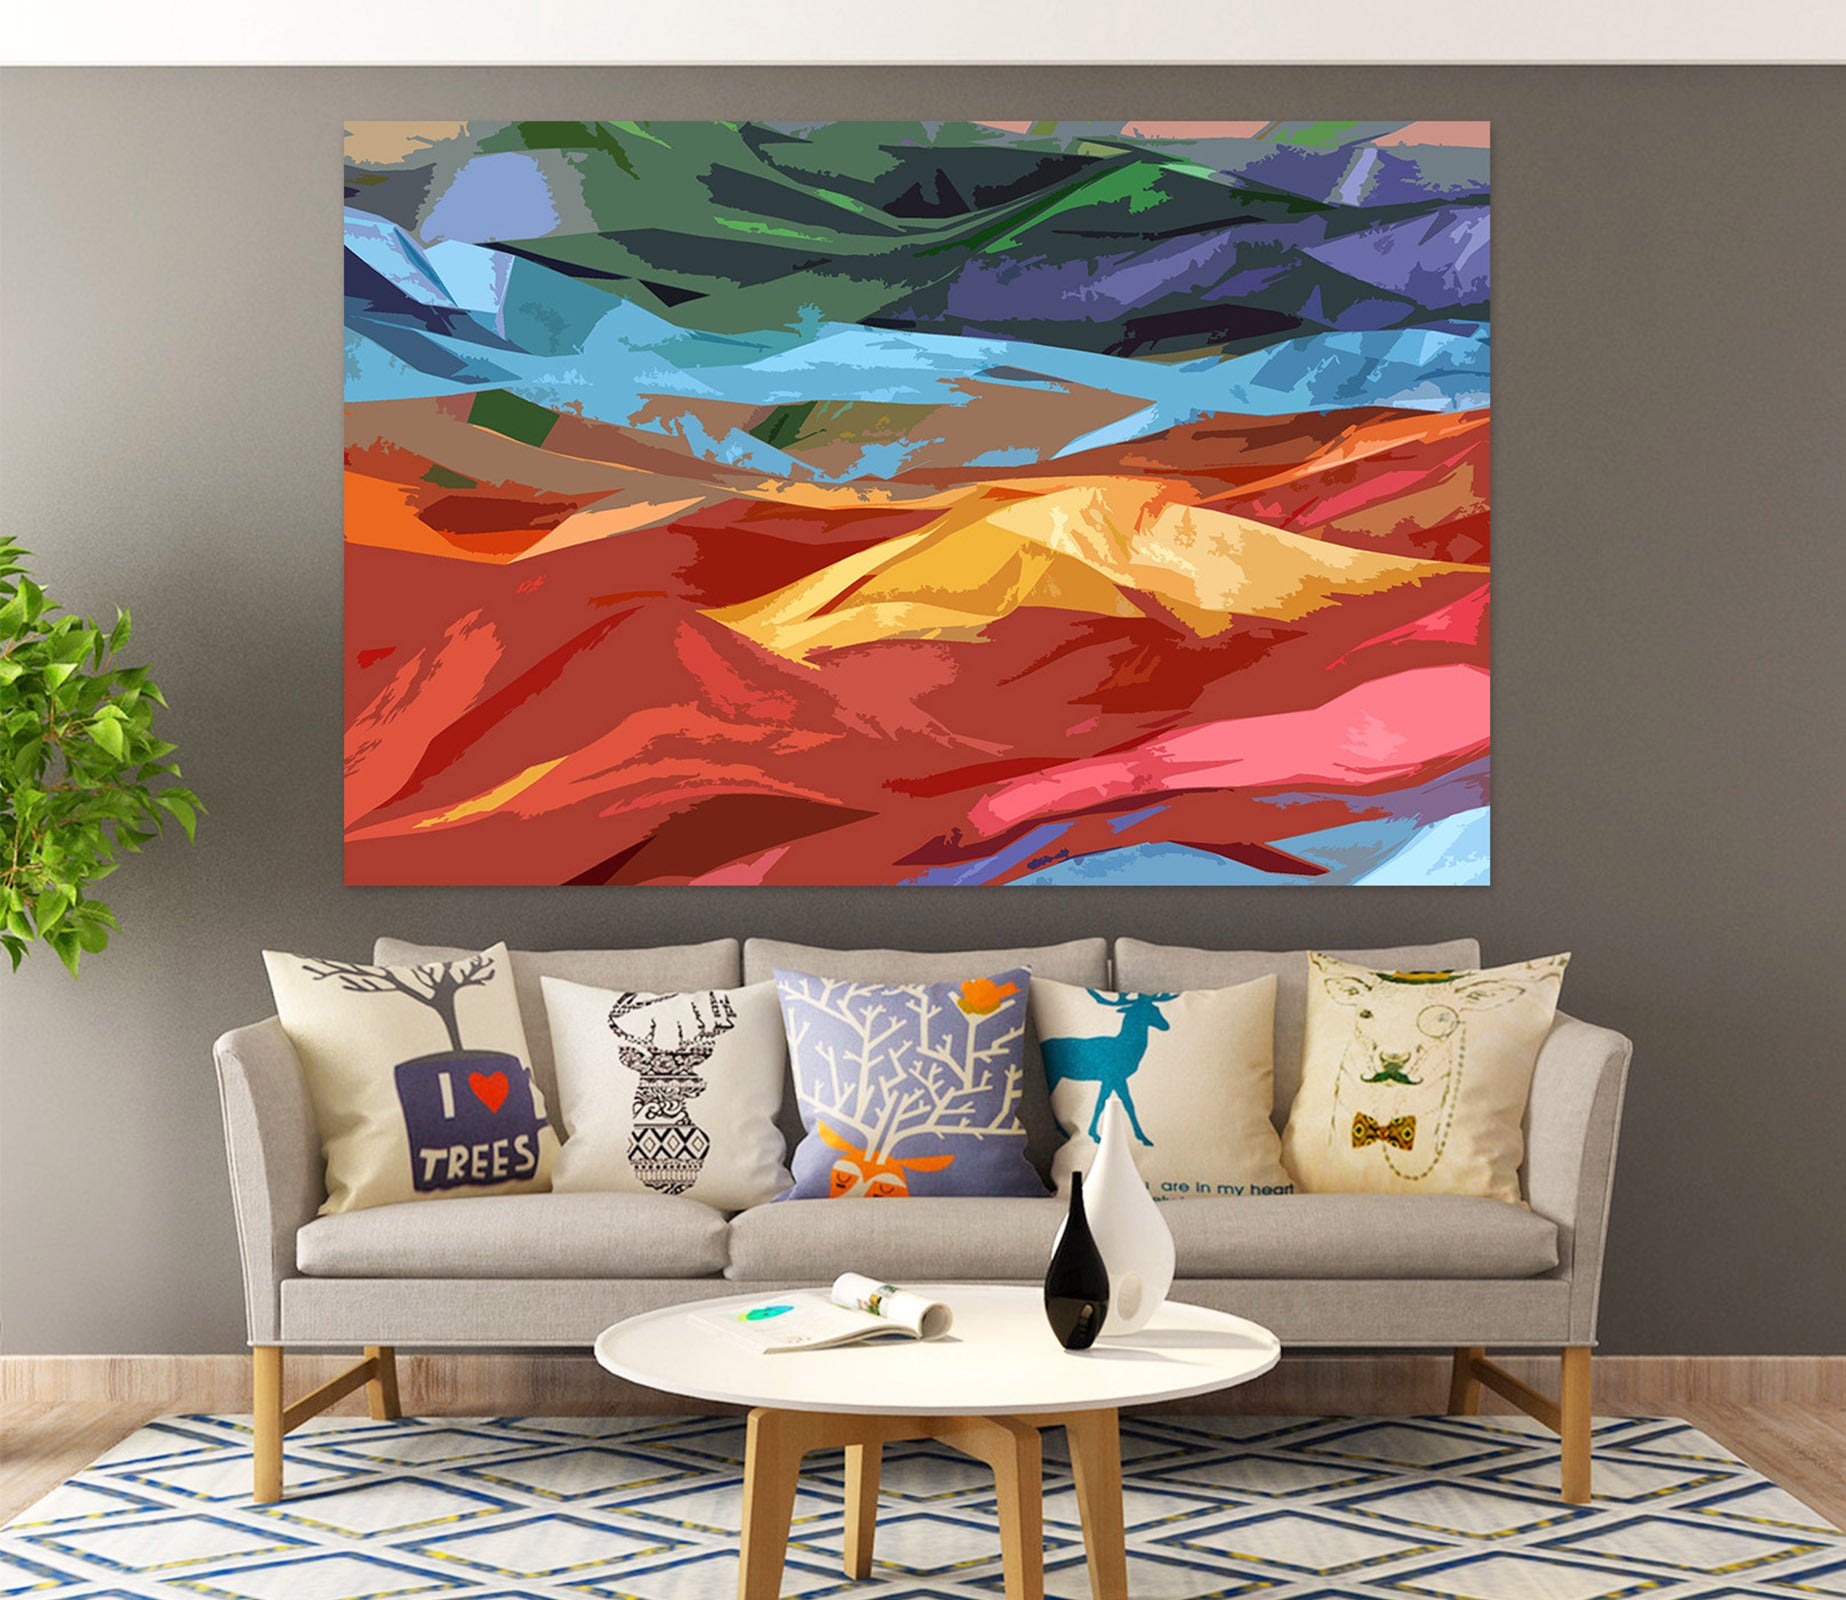 3D Colored Mountains Final 71106 Shandra Smith Wall Sticker